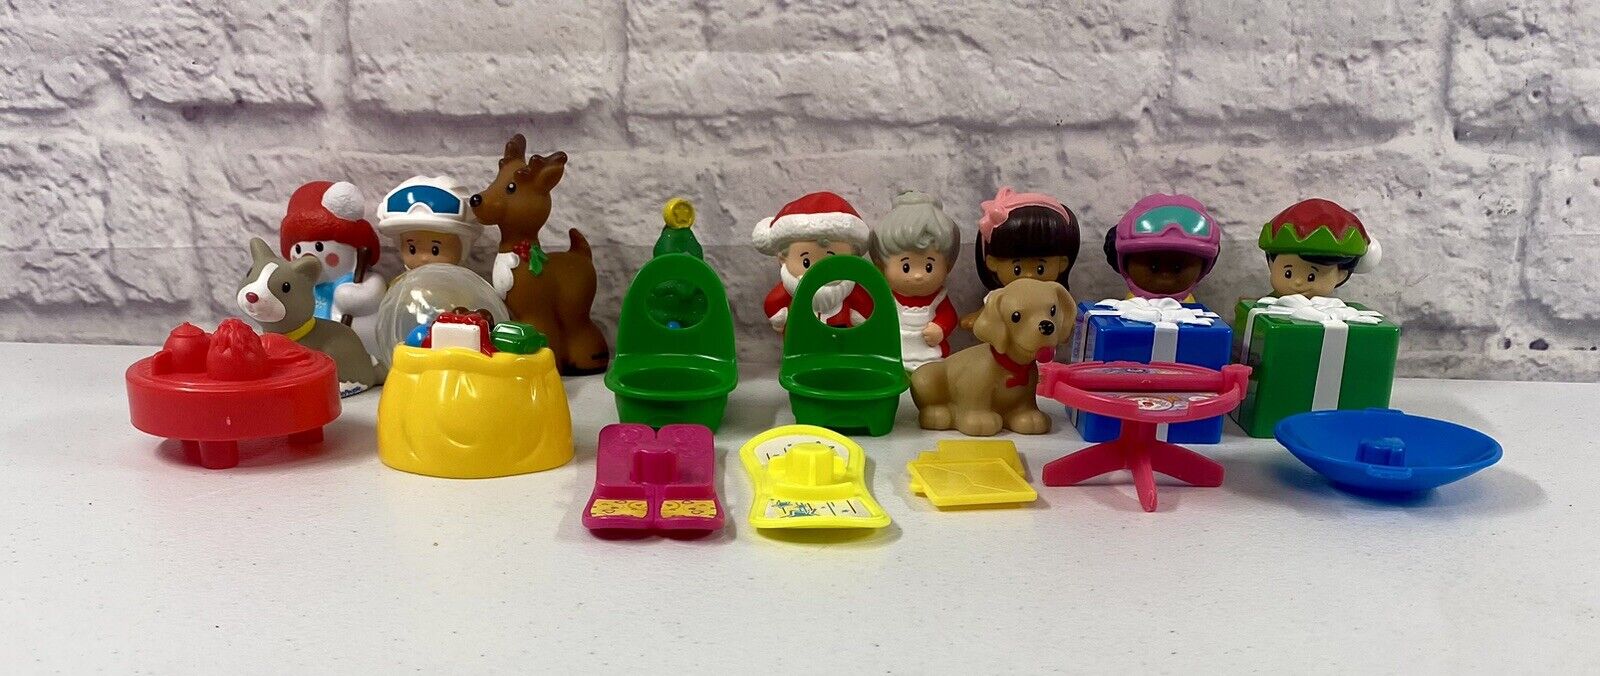 Lot of 24 Fisher Price Little People Figures Advent Calendar 100% Complete